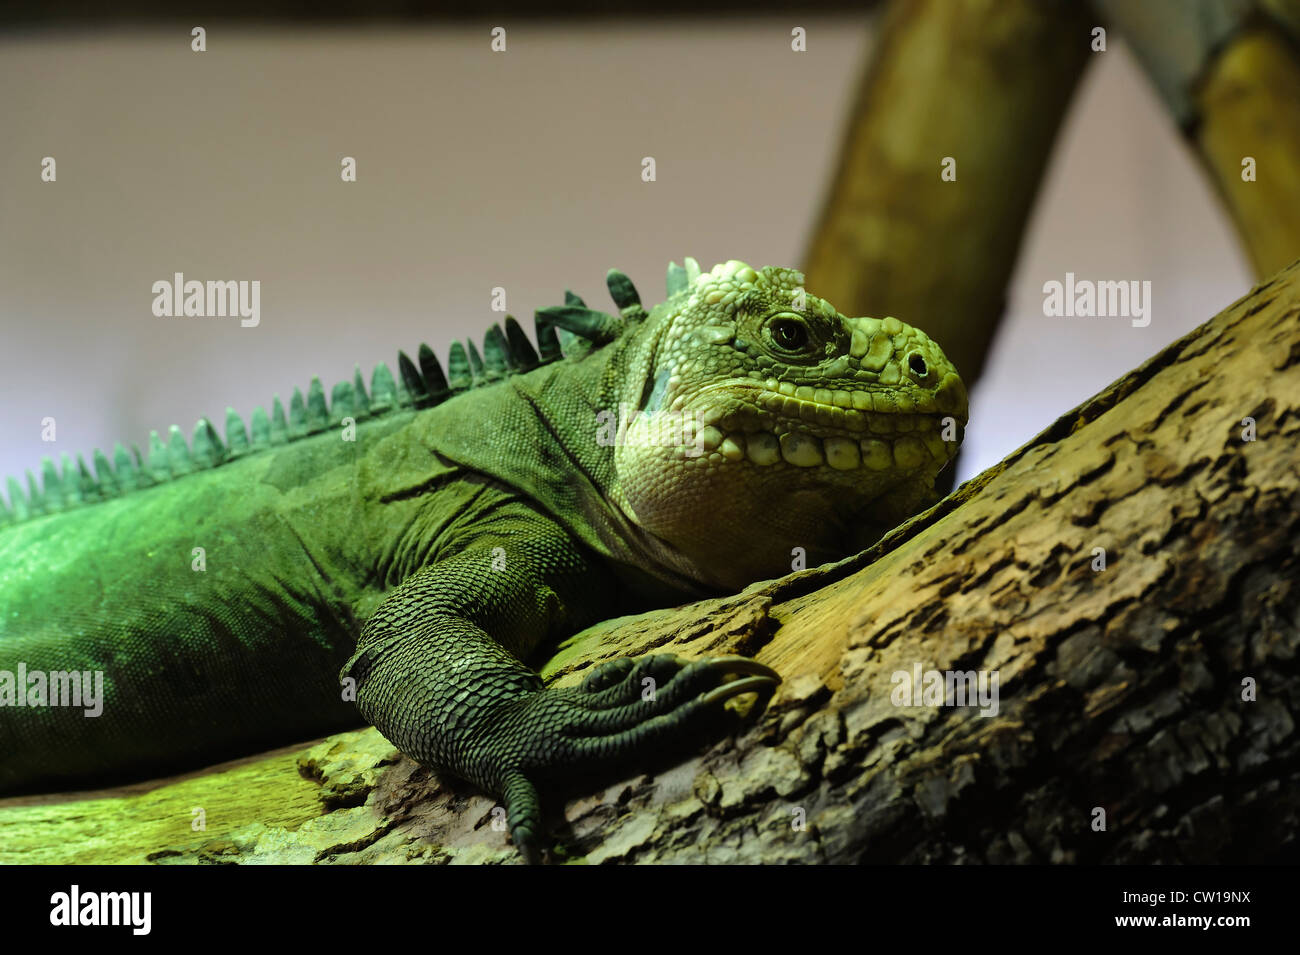 Caimano Iguana blu in Durell Wildlife Conservation Trust, isola di Jersey, Isole del Canale Foto Stock